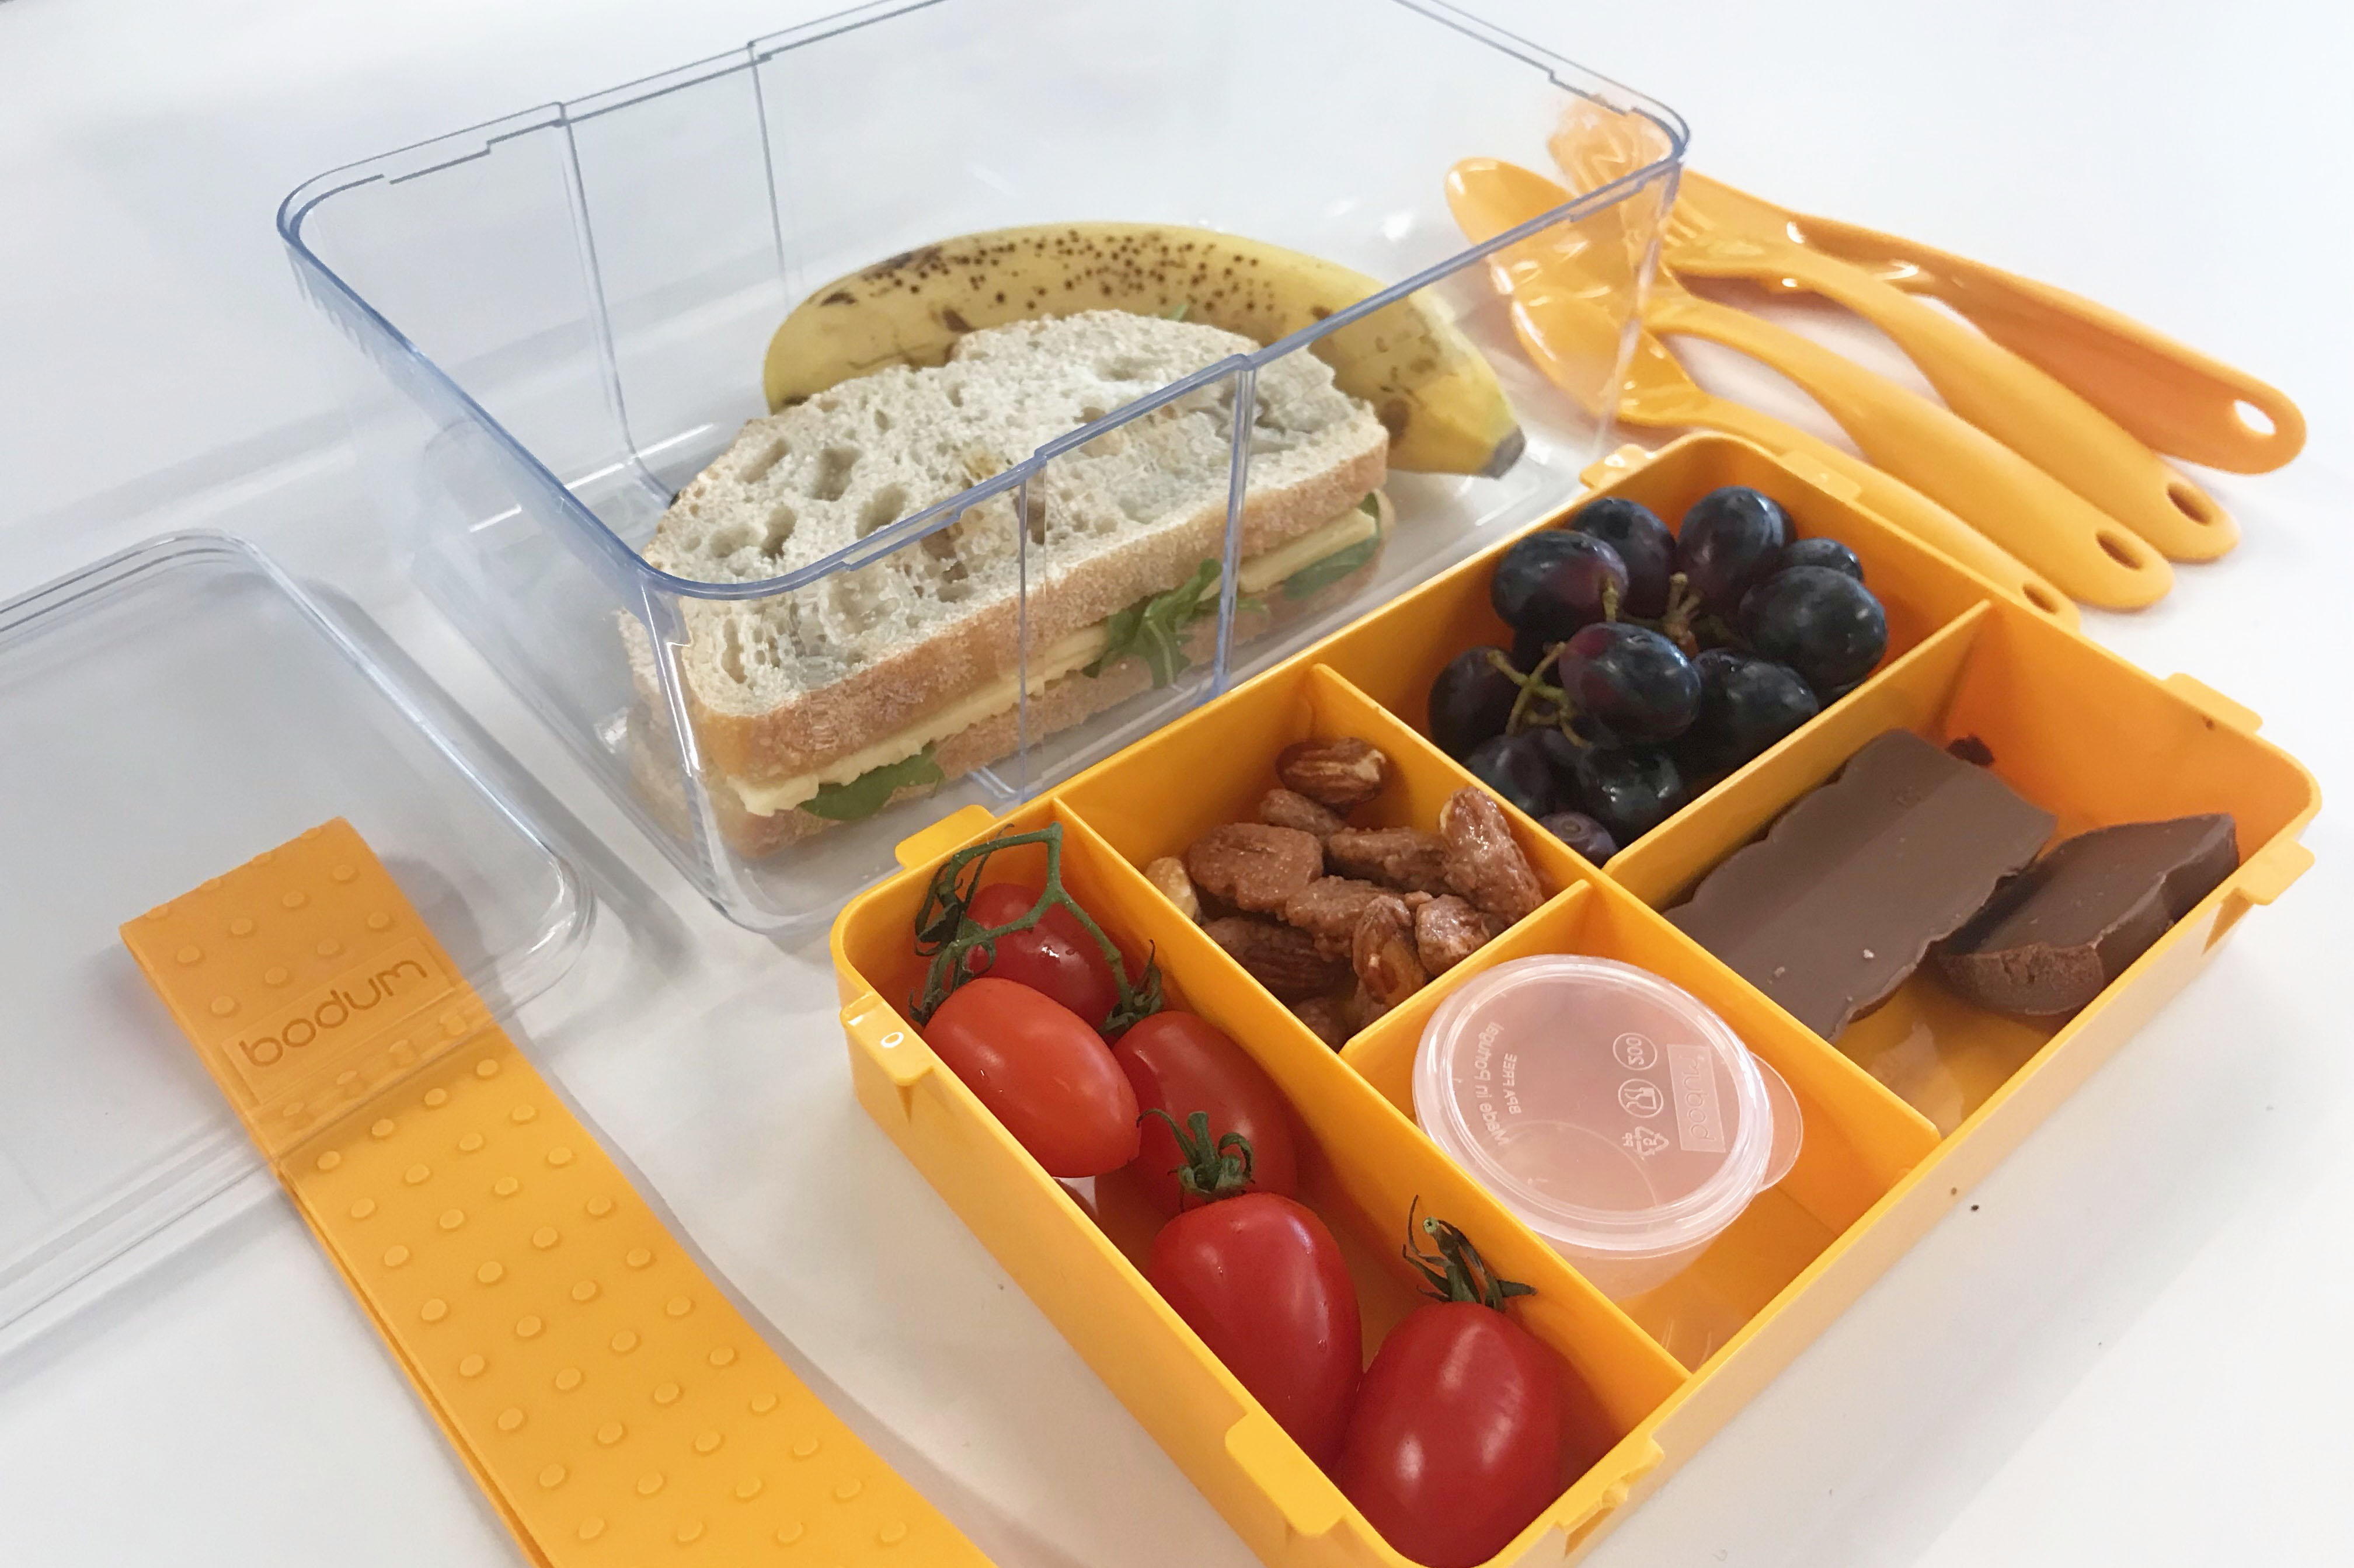 8 Best Bento Boxes 2023: Functional and Affordable Bento Boxes for